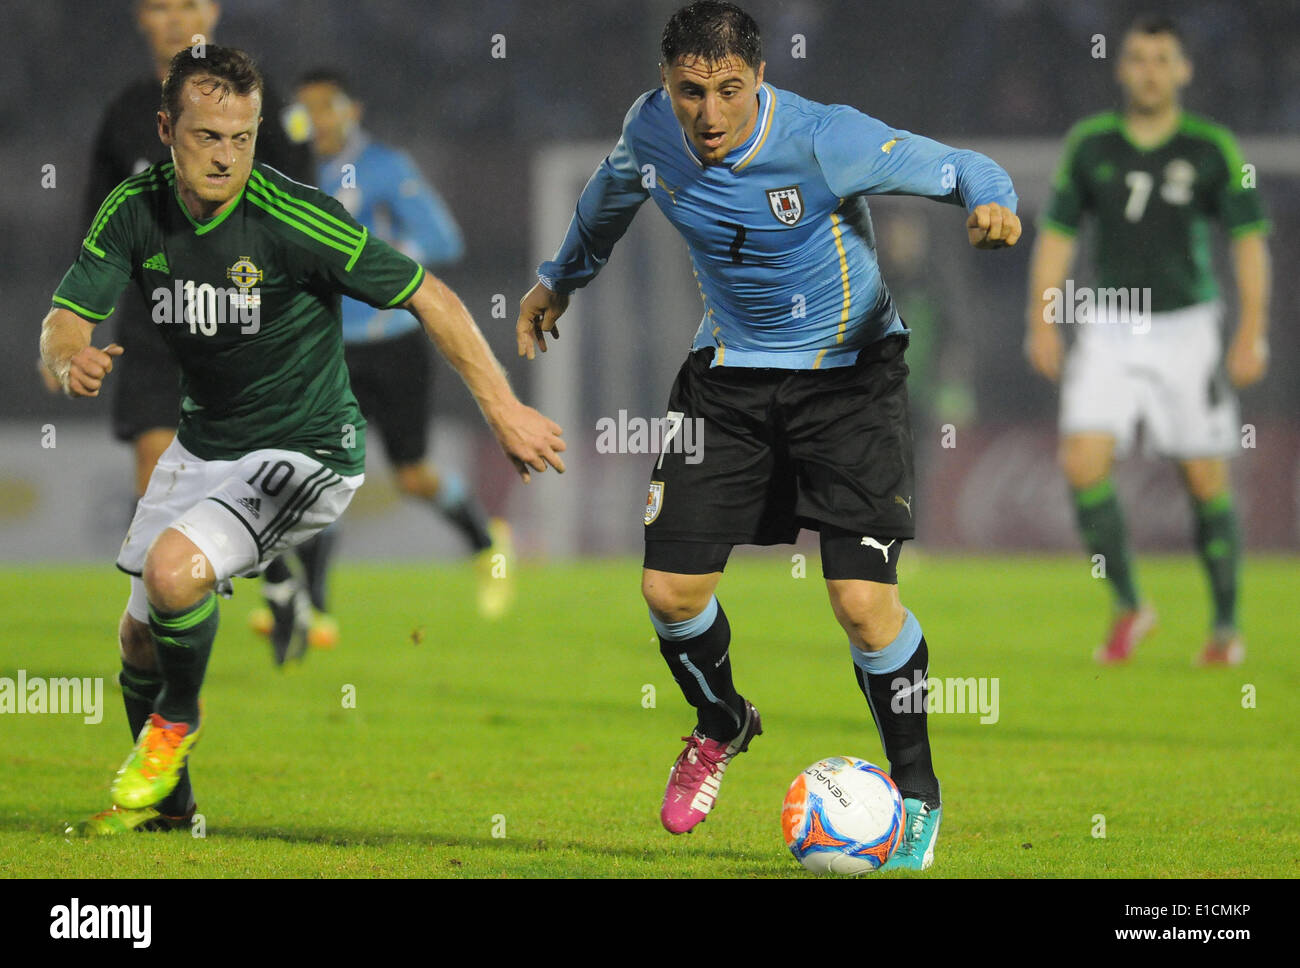 (140531) -- MONTEVIDEO, May 31, 2014 (Xinhua) -- Cristian Rodriguez (R) of Uruguay, vies for the ball with Samuel Clingan of North Ireland during a friendly match at Centenario Stadium, in Montevideo, capital of Uruguay, on May 30, 2014.  (Xinhua/Nicolas Celaya) (rh) Stock Photo